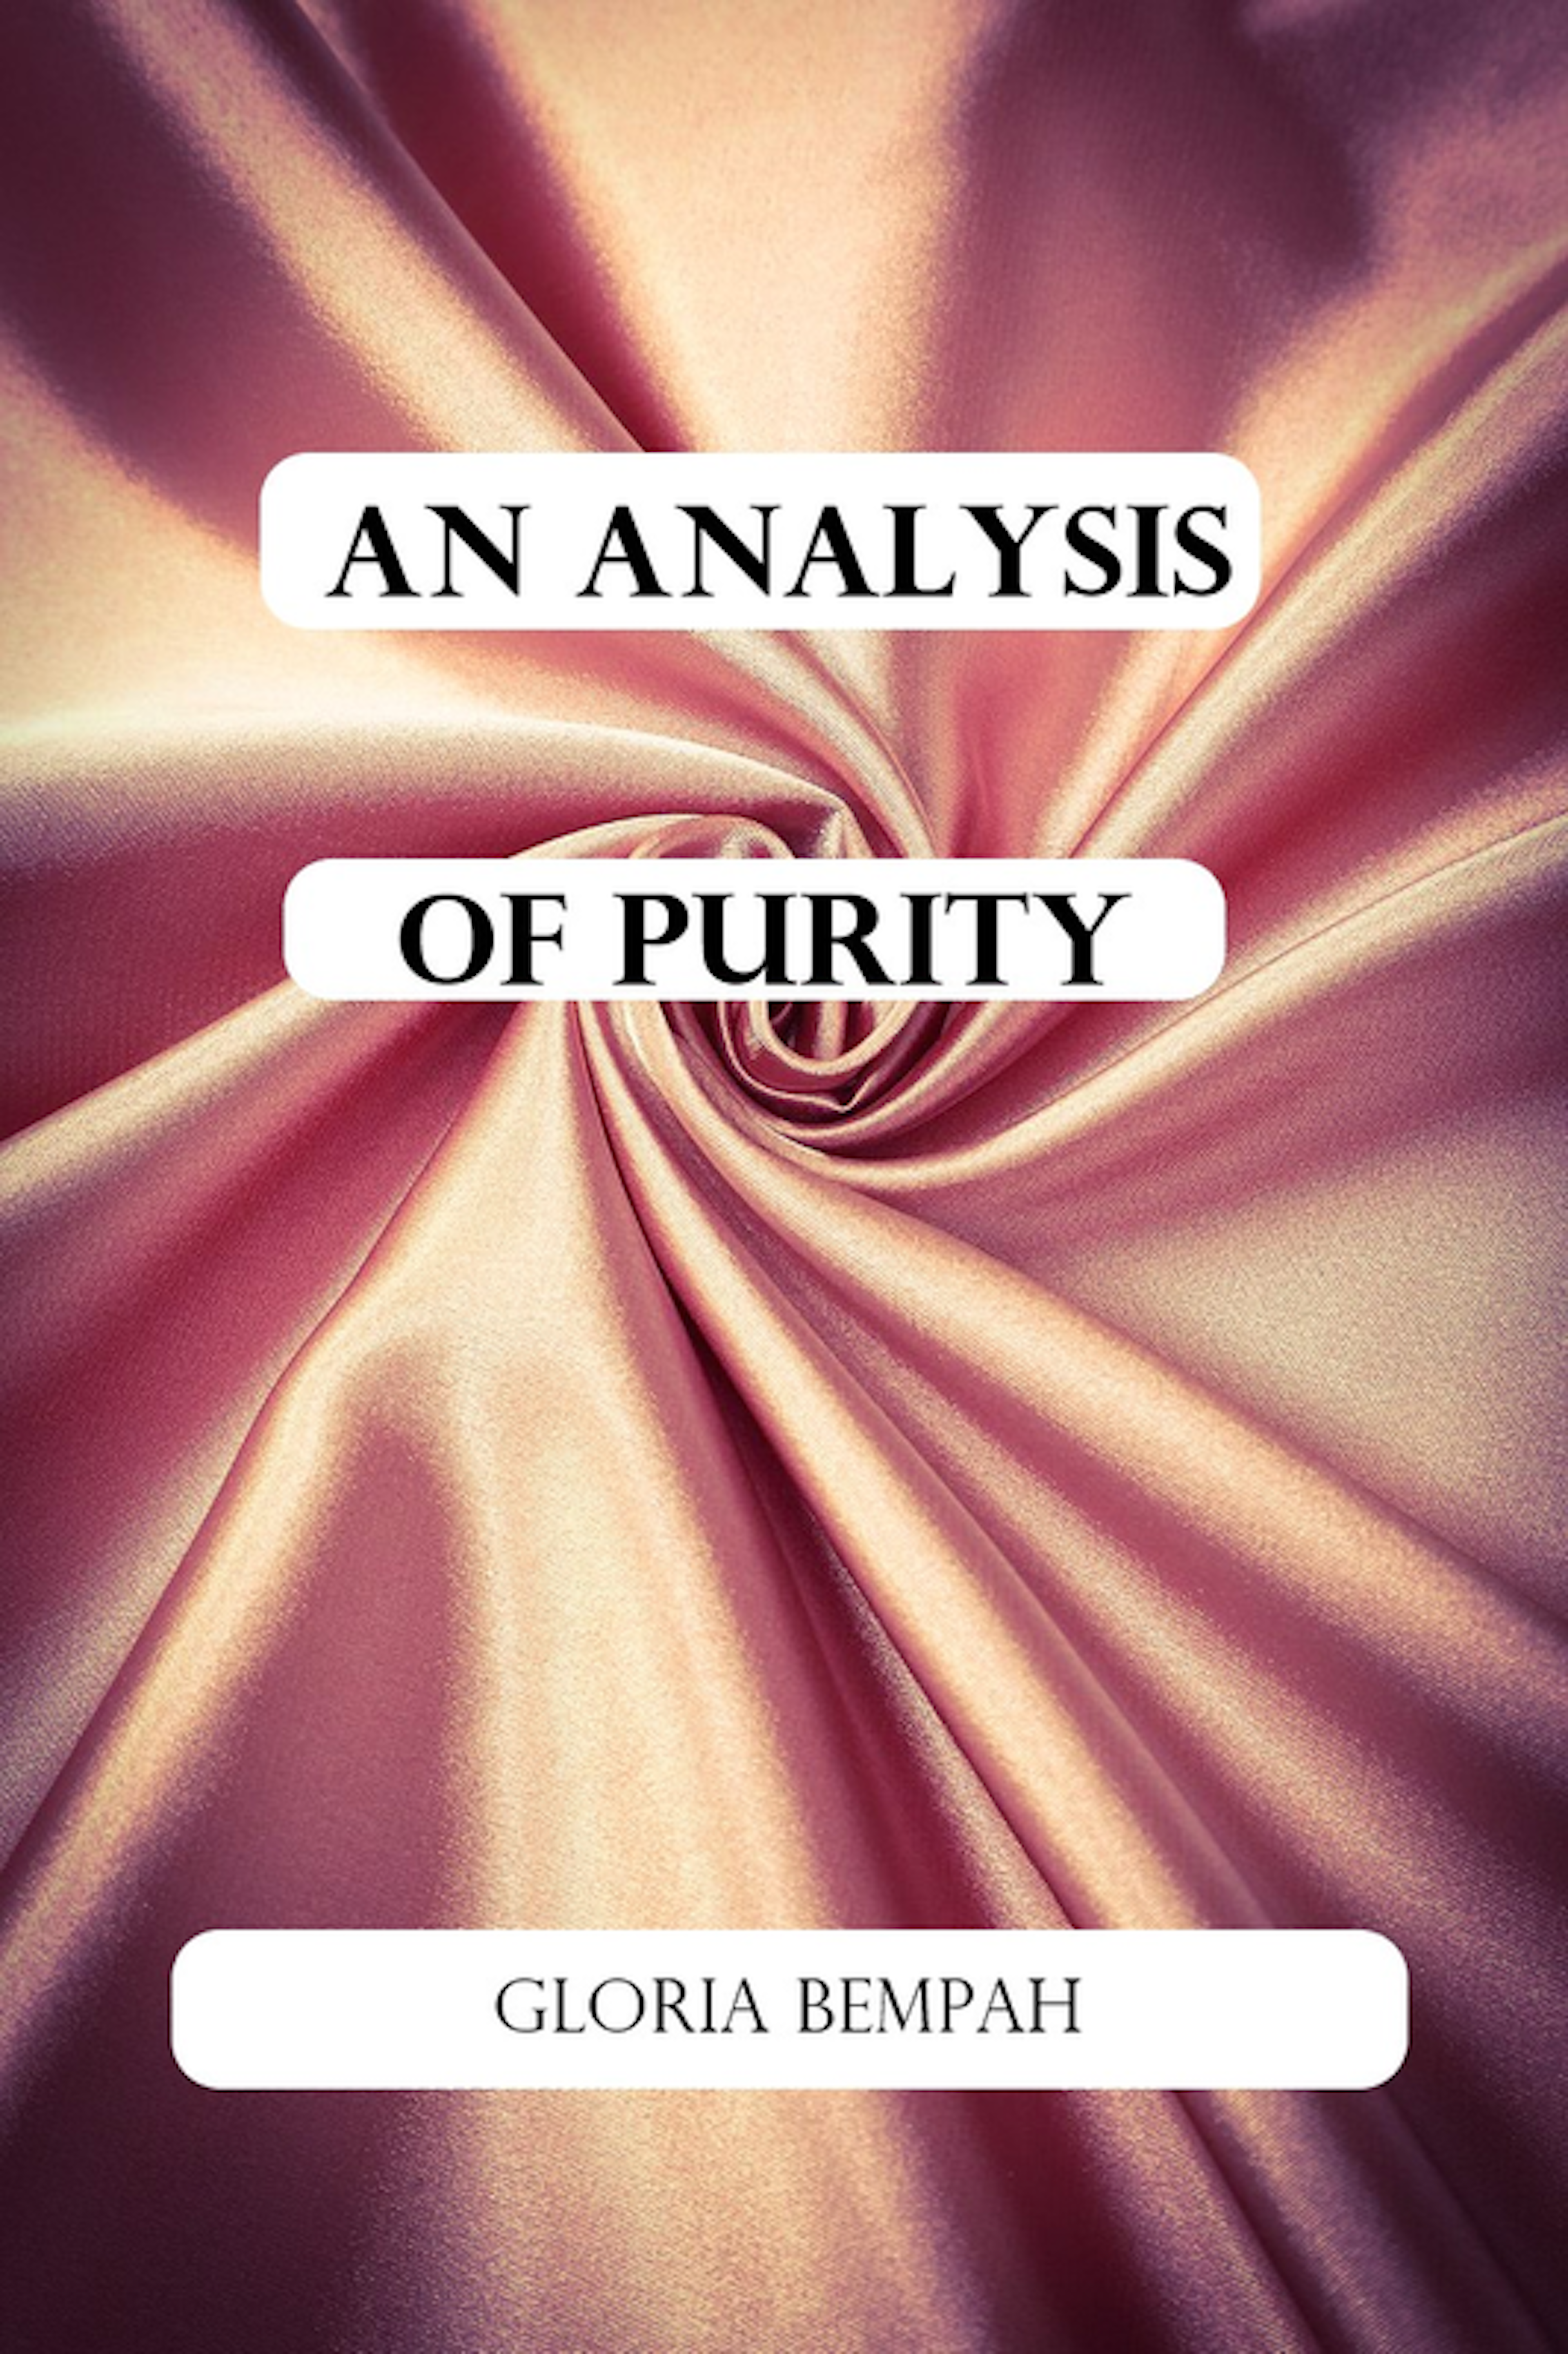 An Analysis of Purity